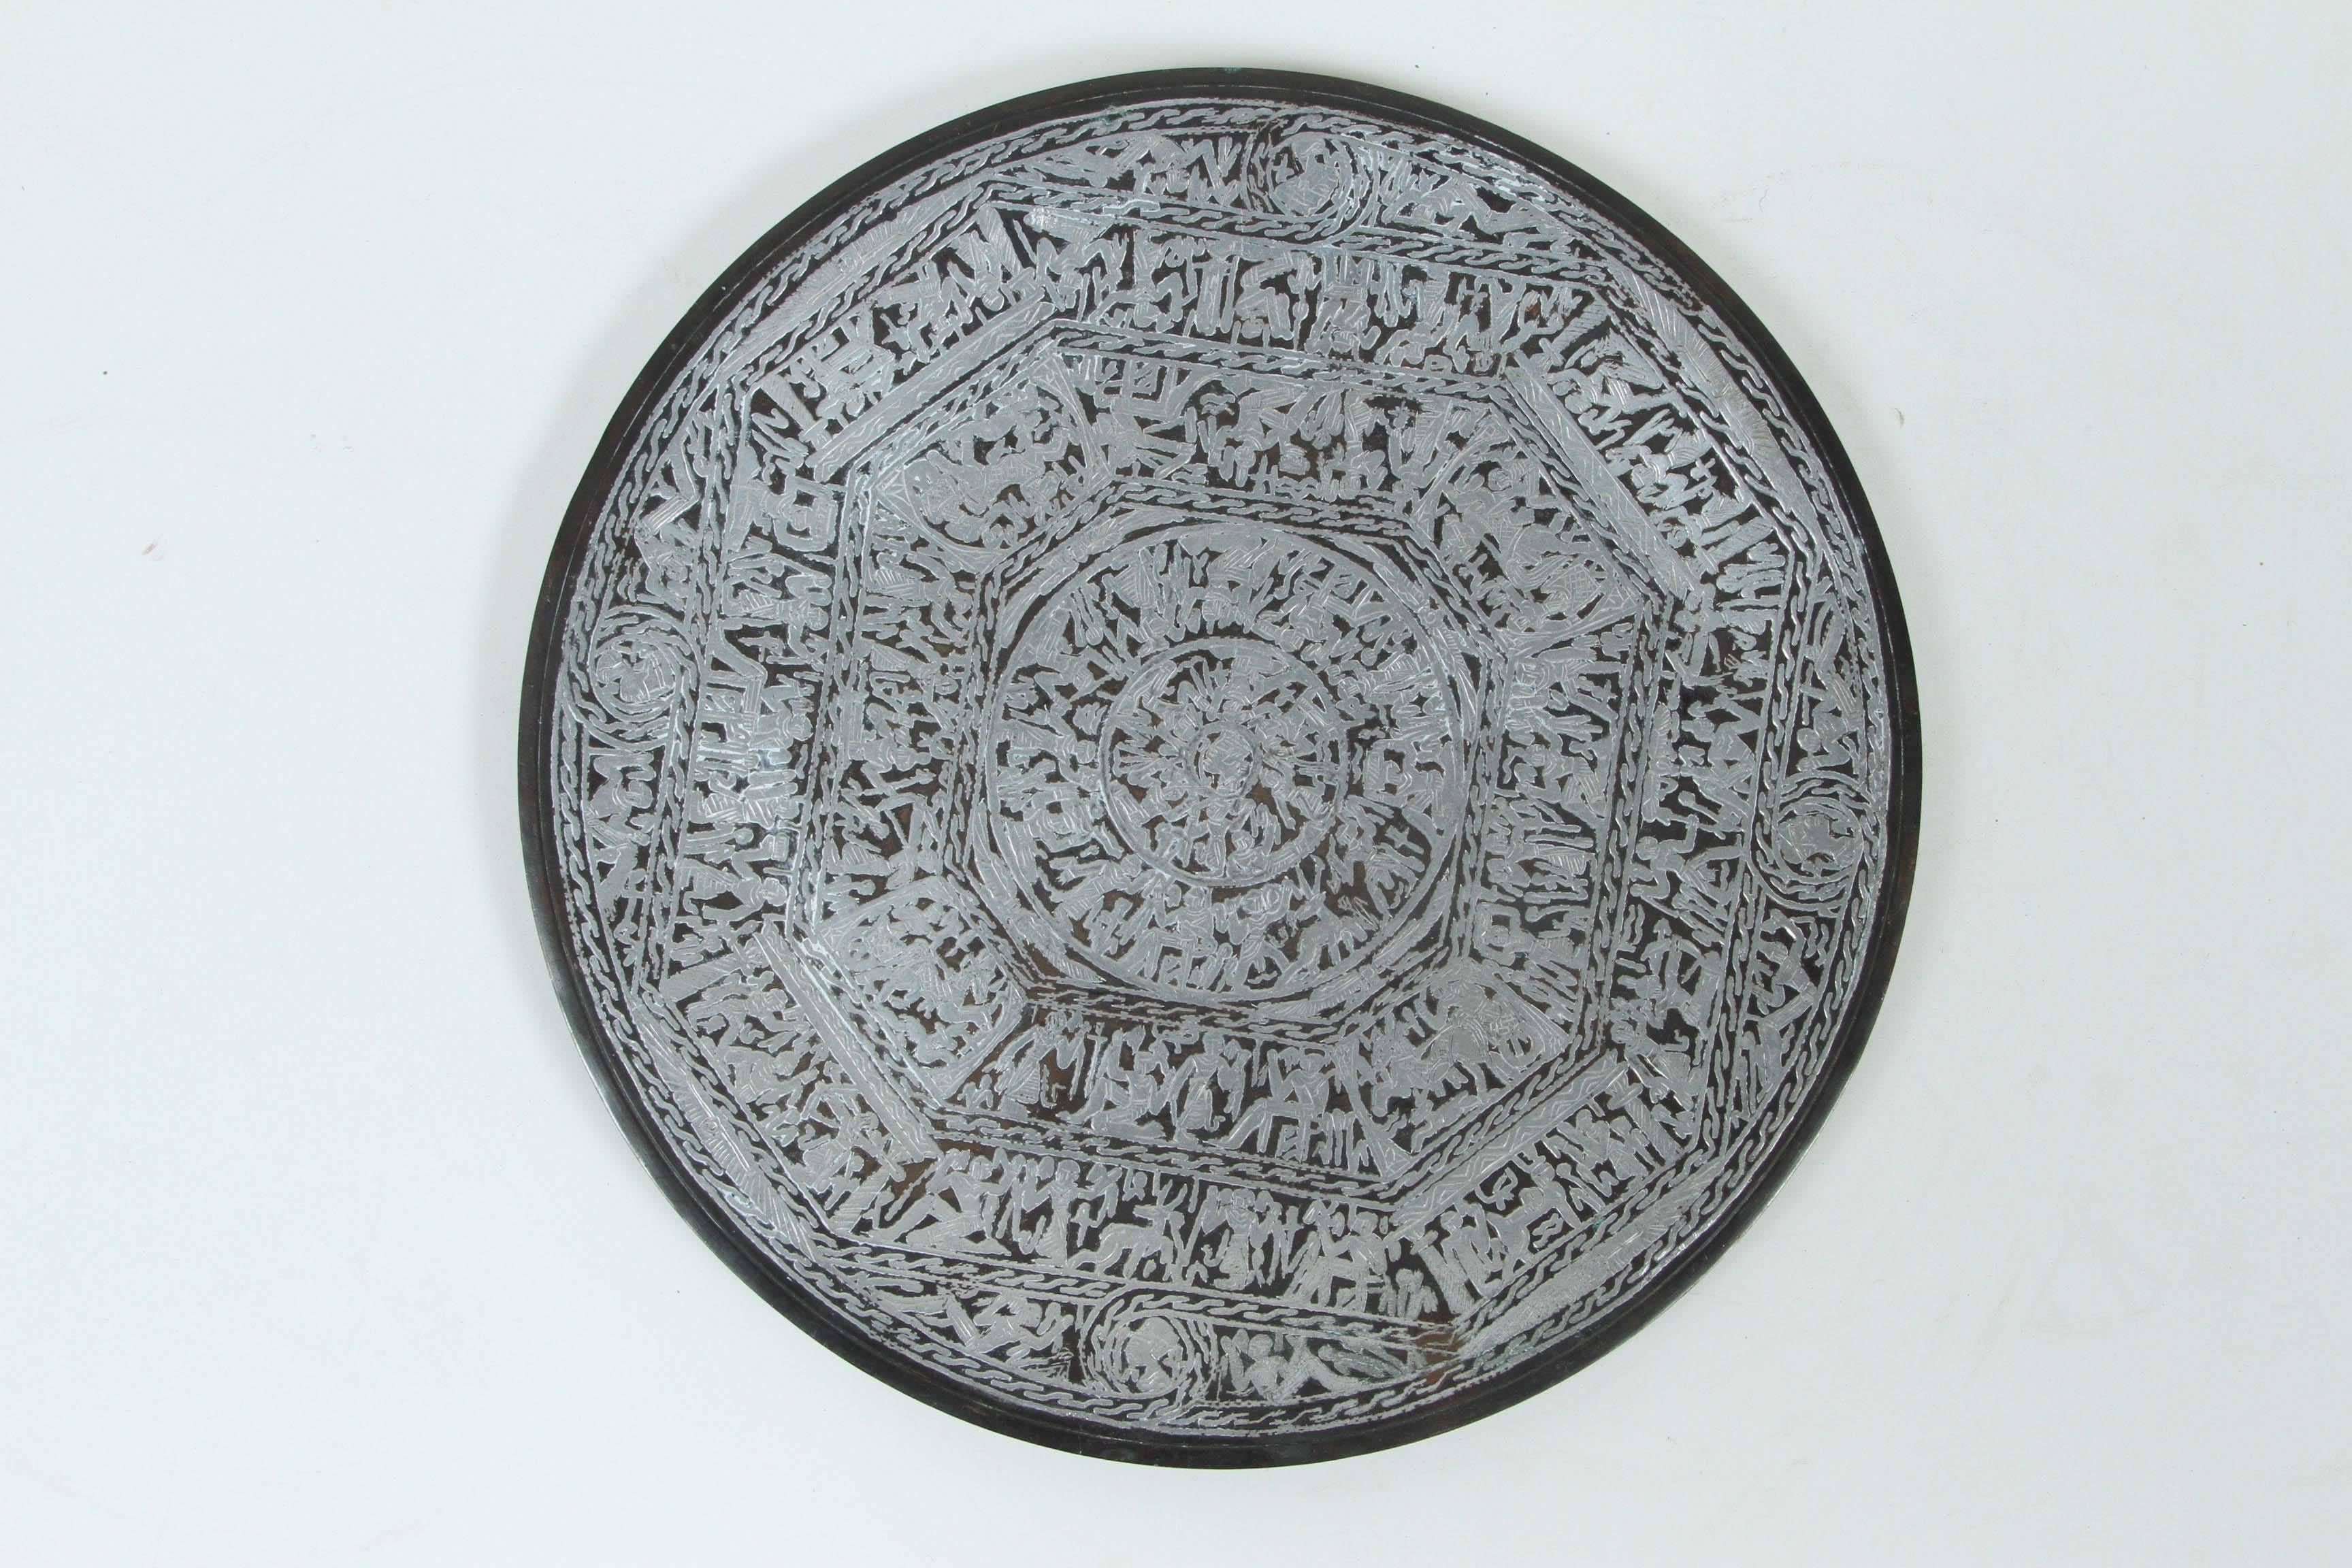 Blackened Egyptian Revival Brass Tray Overlay with Silver Designs and Hieroglyphics